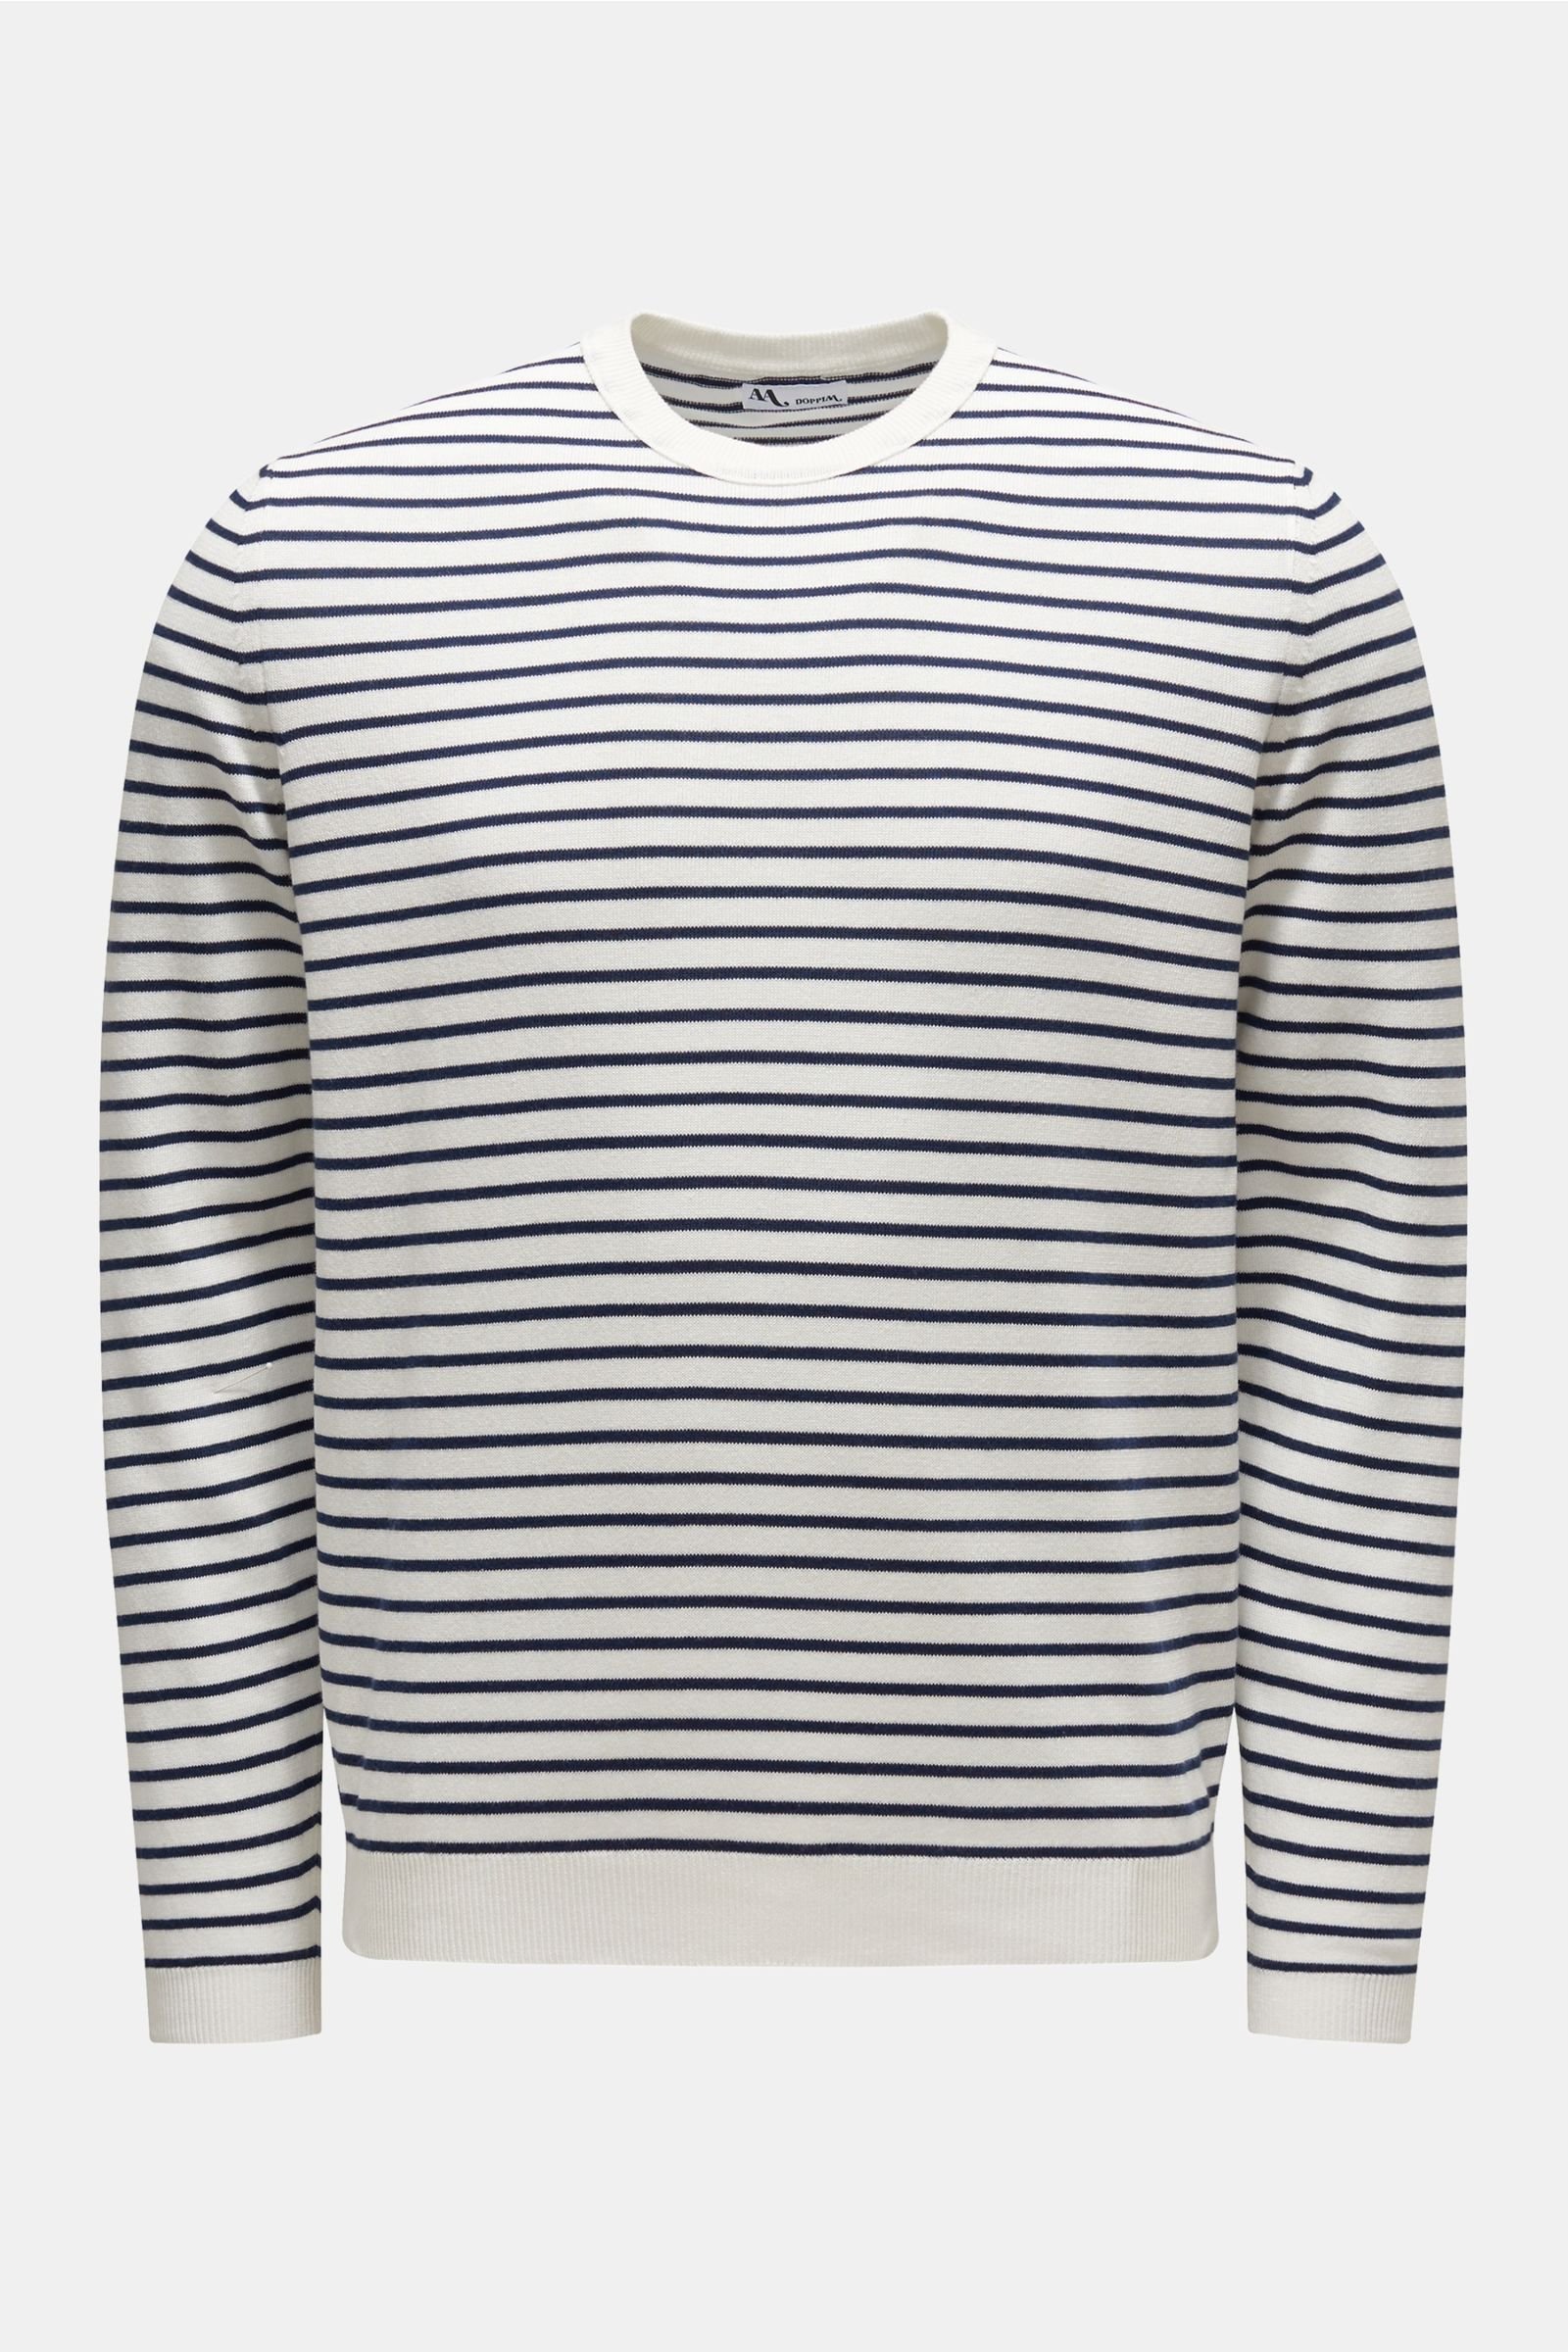 Crew neck jumper 'Aabacco' off-white/navy striped